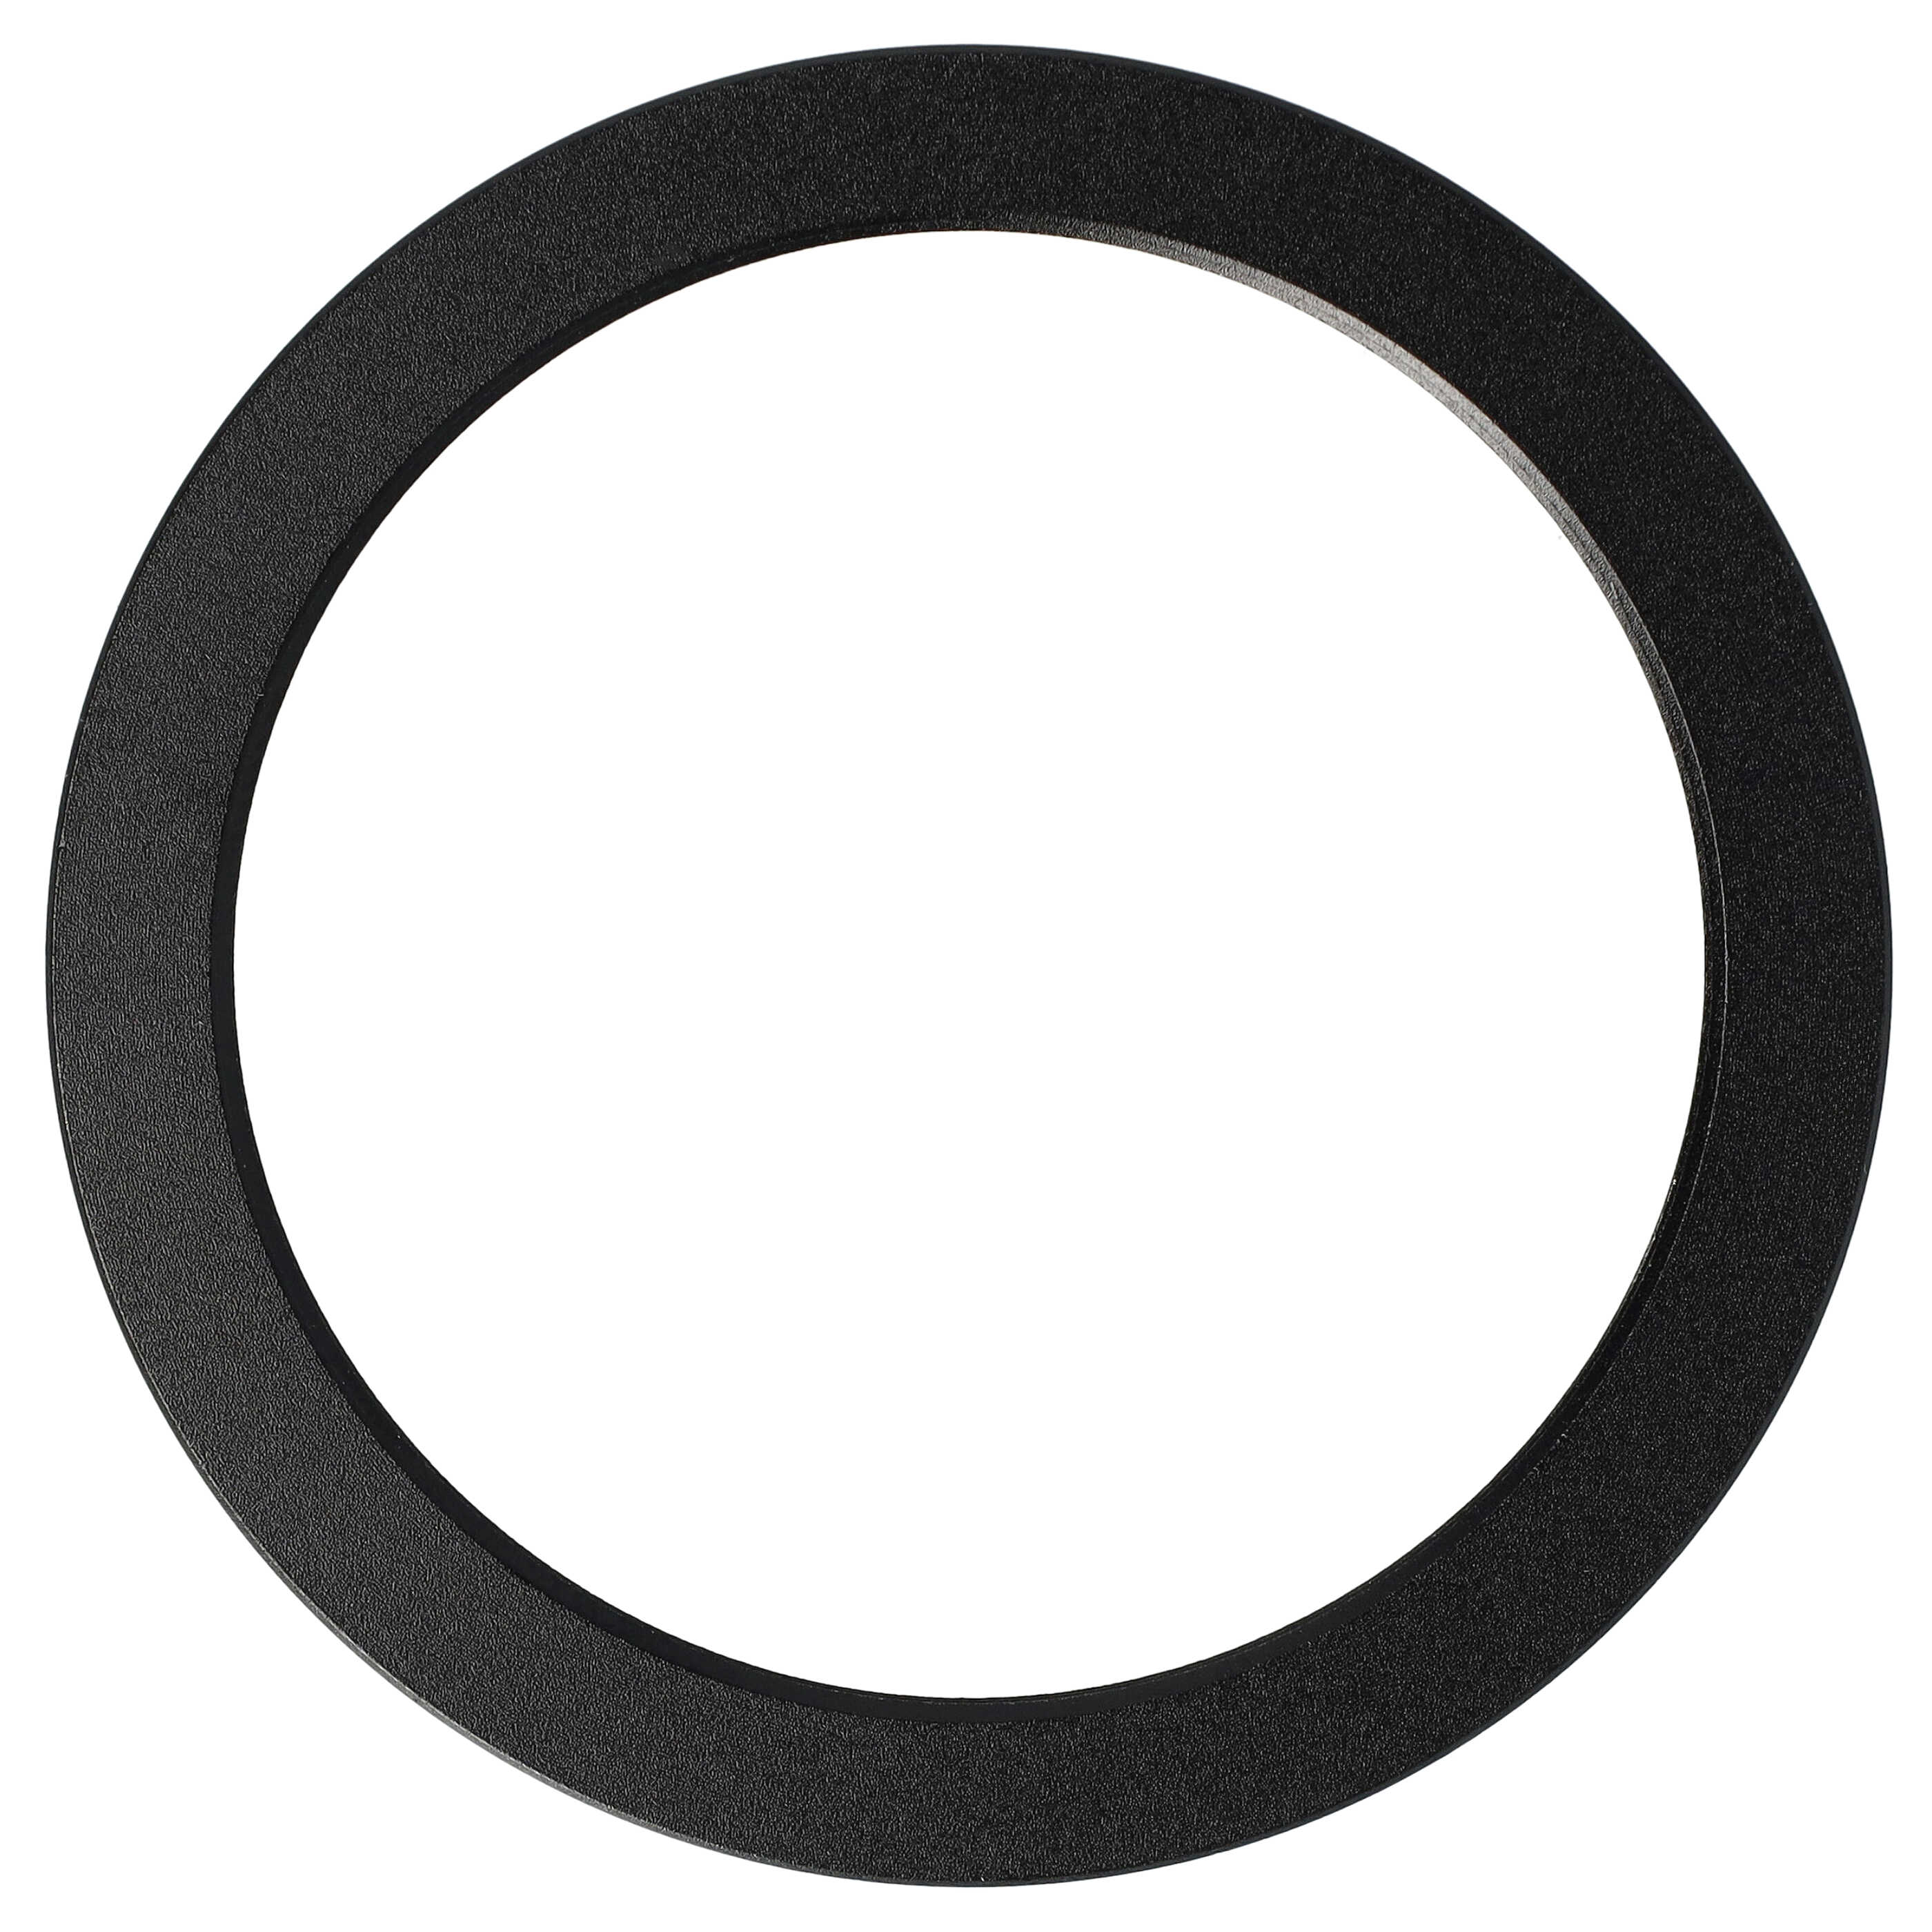 Step-Down Ring Adapter from 62 mm to 52 mm suitable for Camera Lens - Filter Adapter, metal